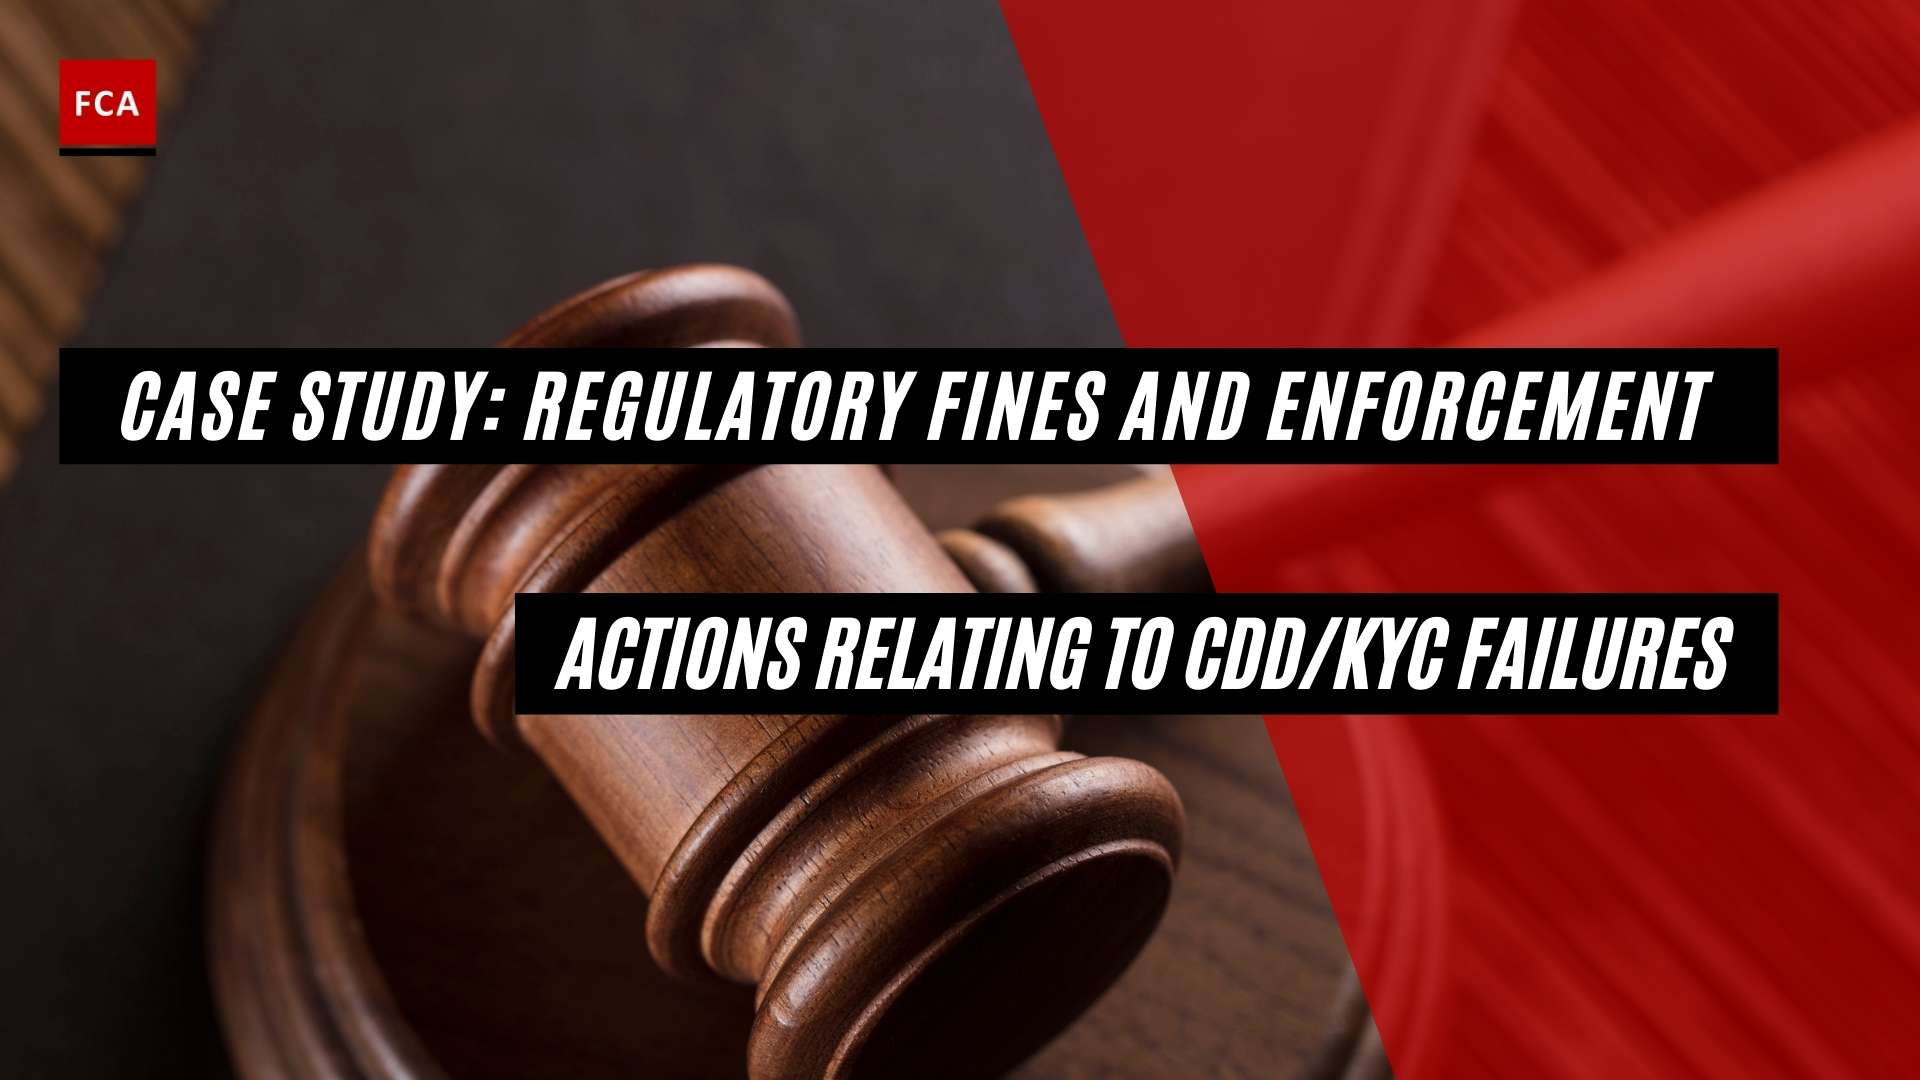 Regulatory Fines And Enforcement Actions Relating To Cdd/Kyc Failures